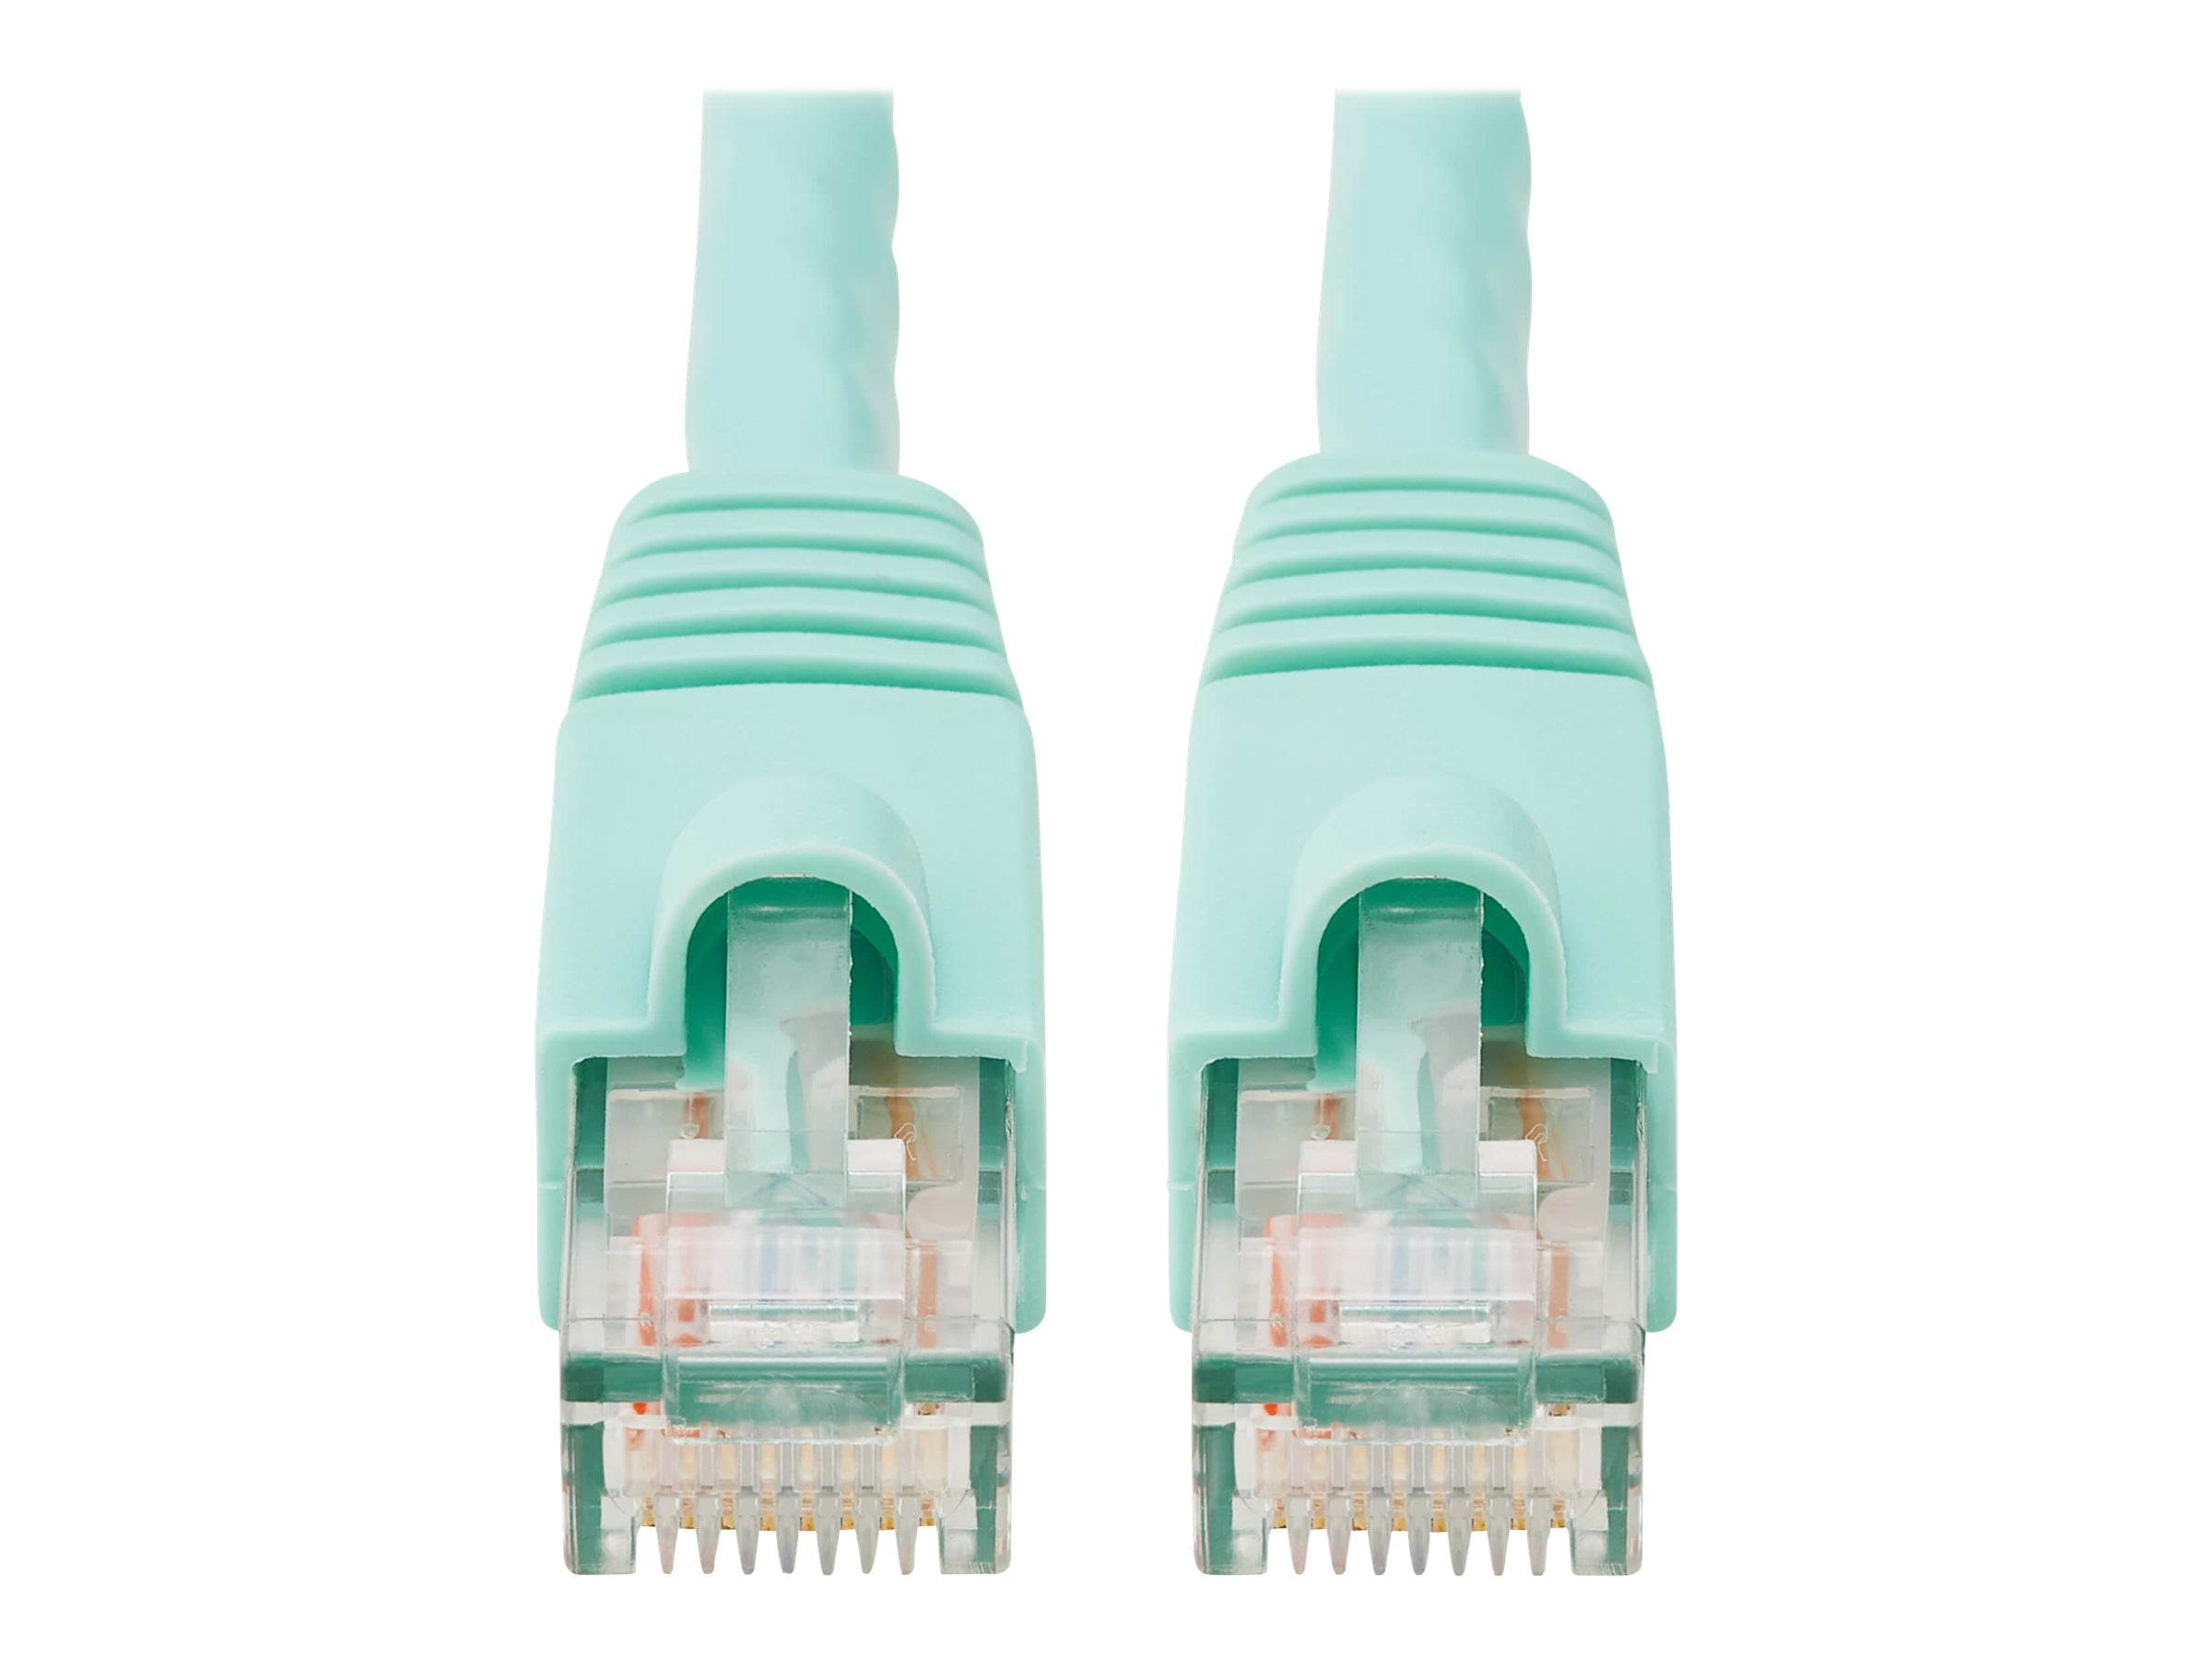 Green Size 15 feet Color 15-feet Tripp Lite N201-015-GN Cat6 Gigabit Green Snagless Molded Patch Cable RJ45M/M